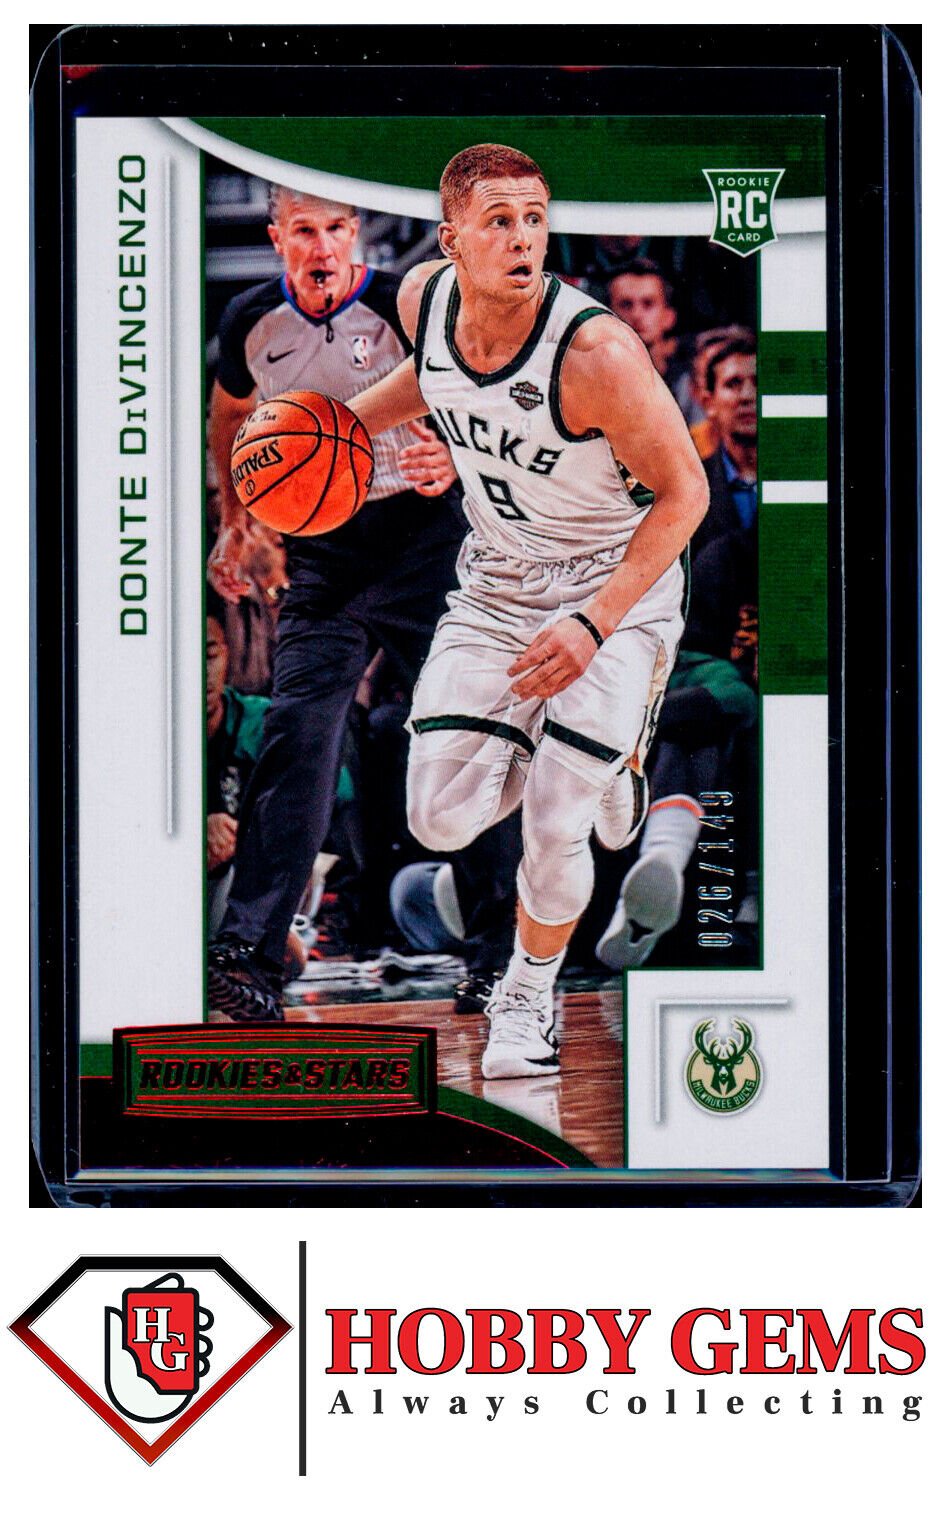 DONTE DIVINCENZO 2018-19 Panini Chronicles RC Rookies & Stars Red 26/149 #624 Basketball Parallel Serial Numbered - Hobby Gems